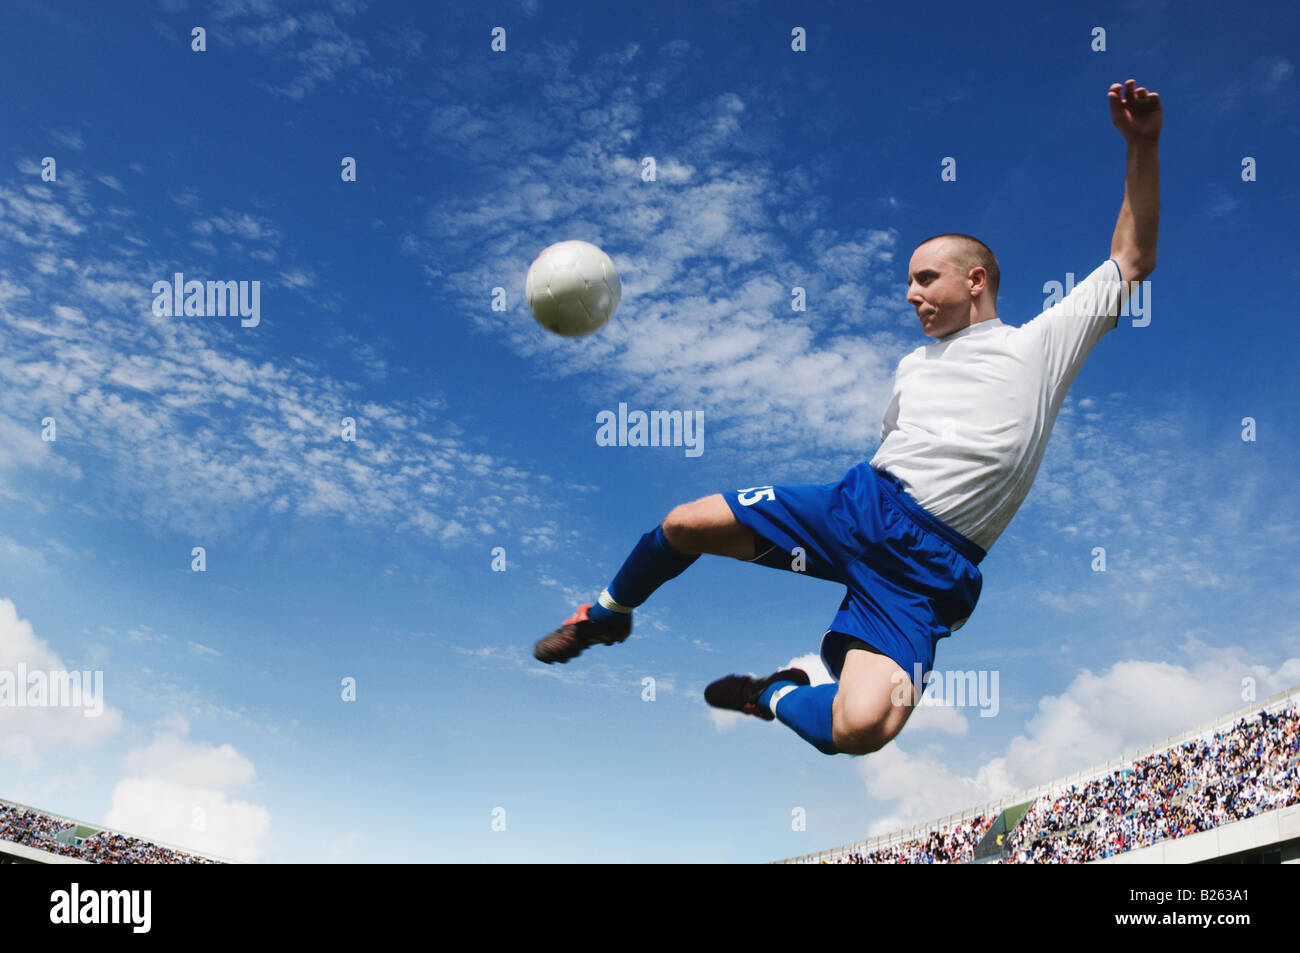 Soccer player half volley stock vector. Illustration of male